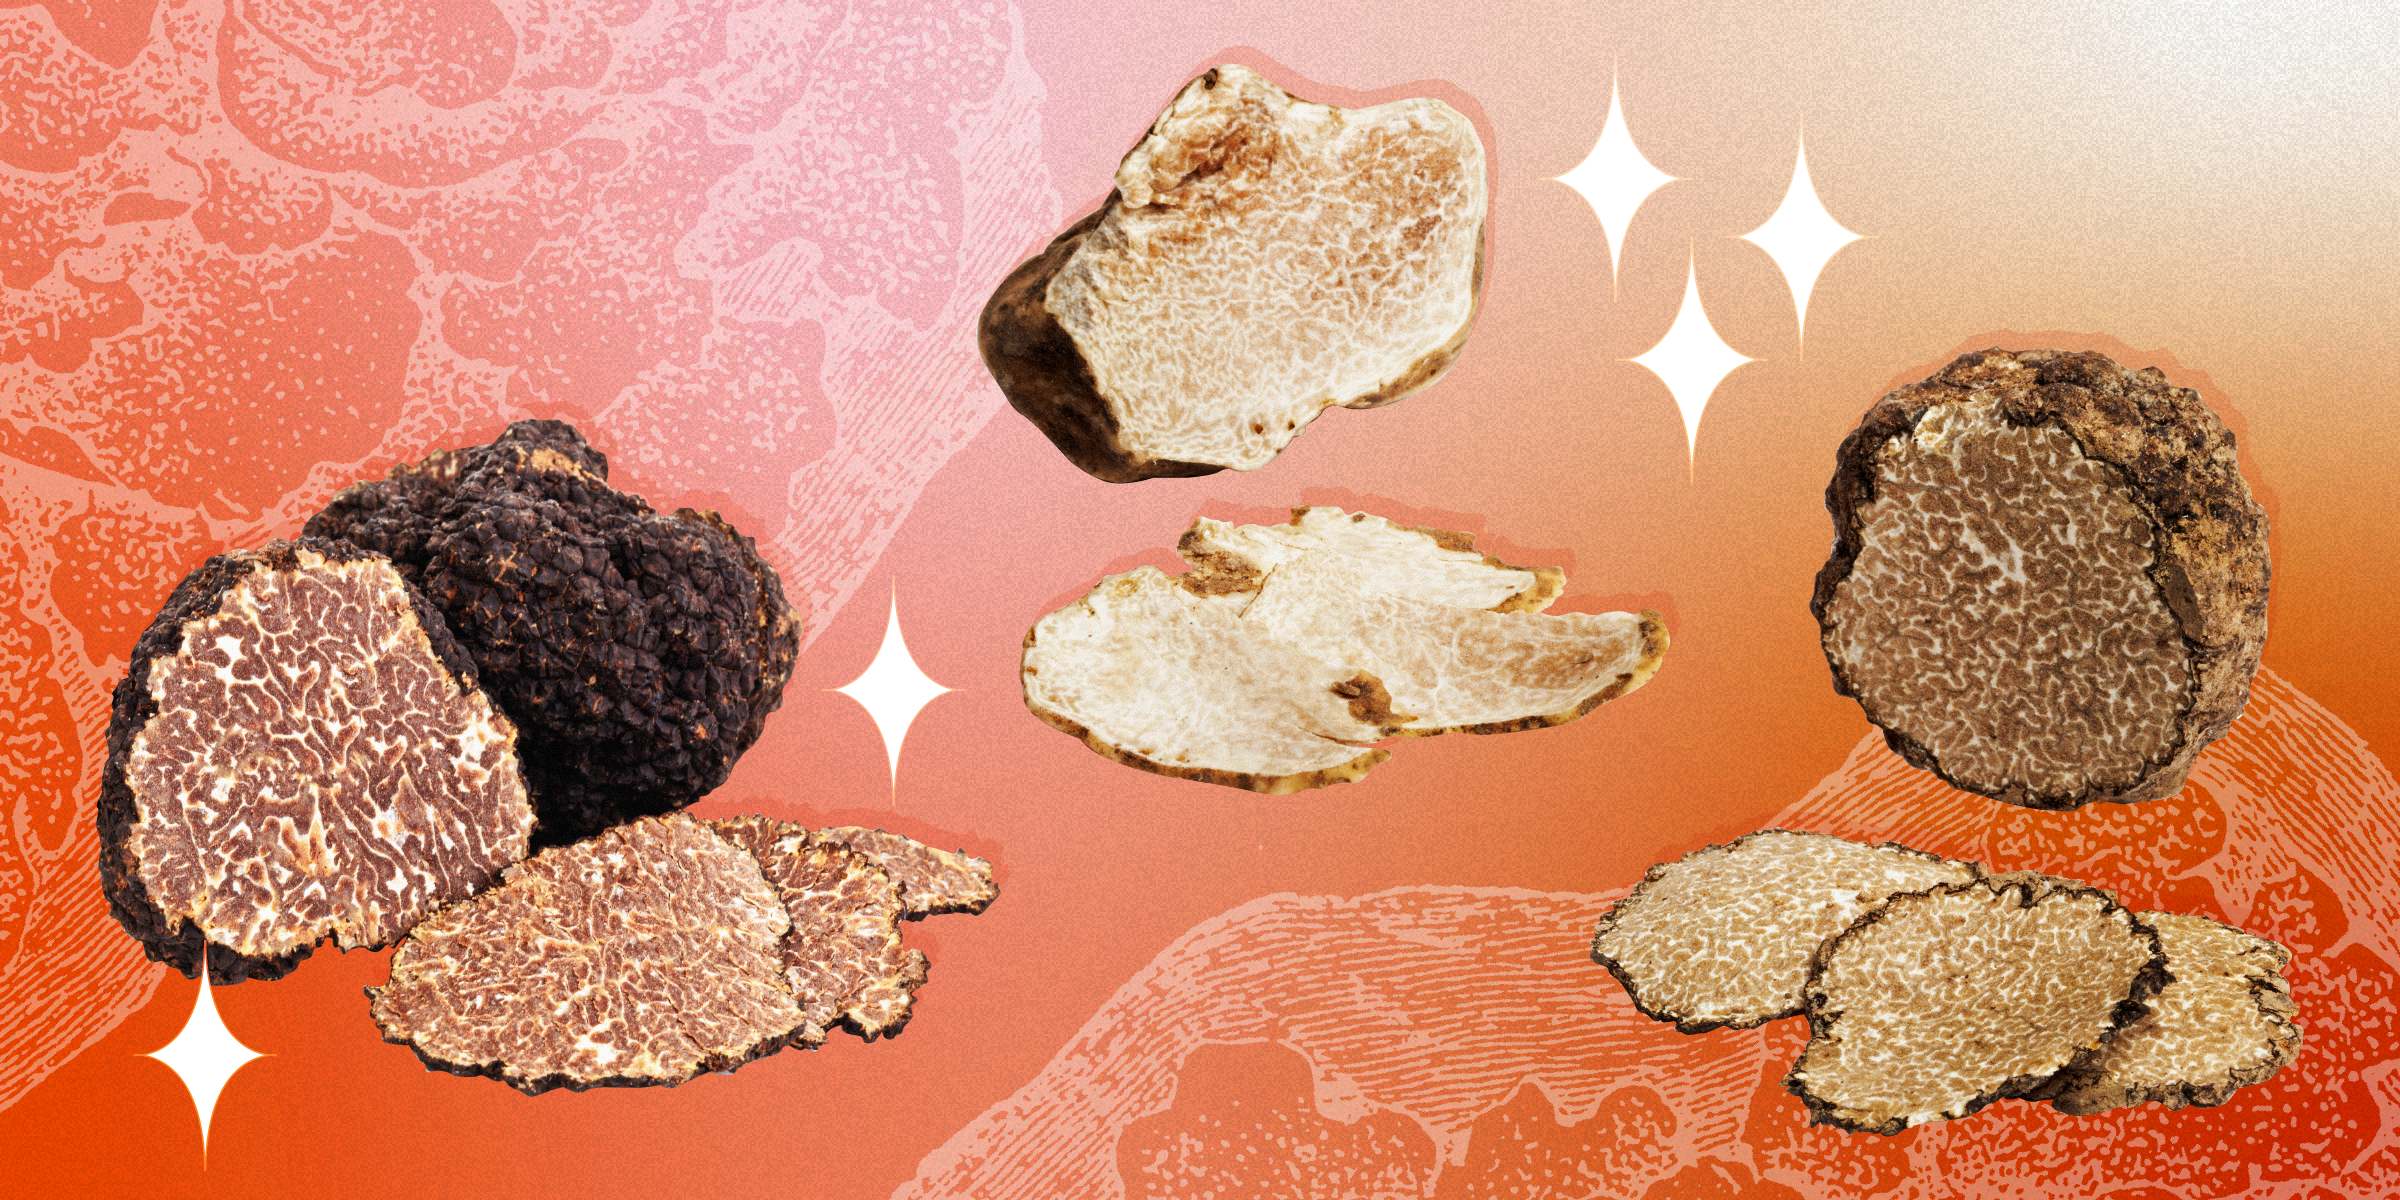 burgundy, white and black truffle varieties on an orange background with a faint fungus illustration, and white sparkles